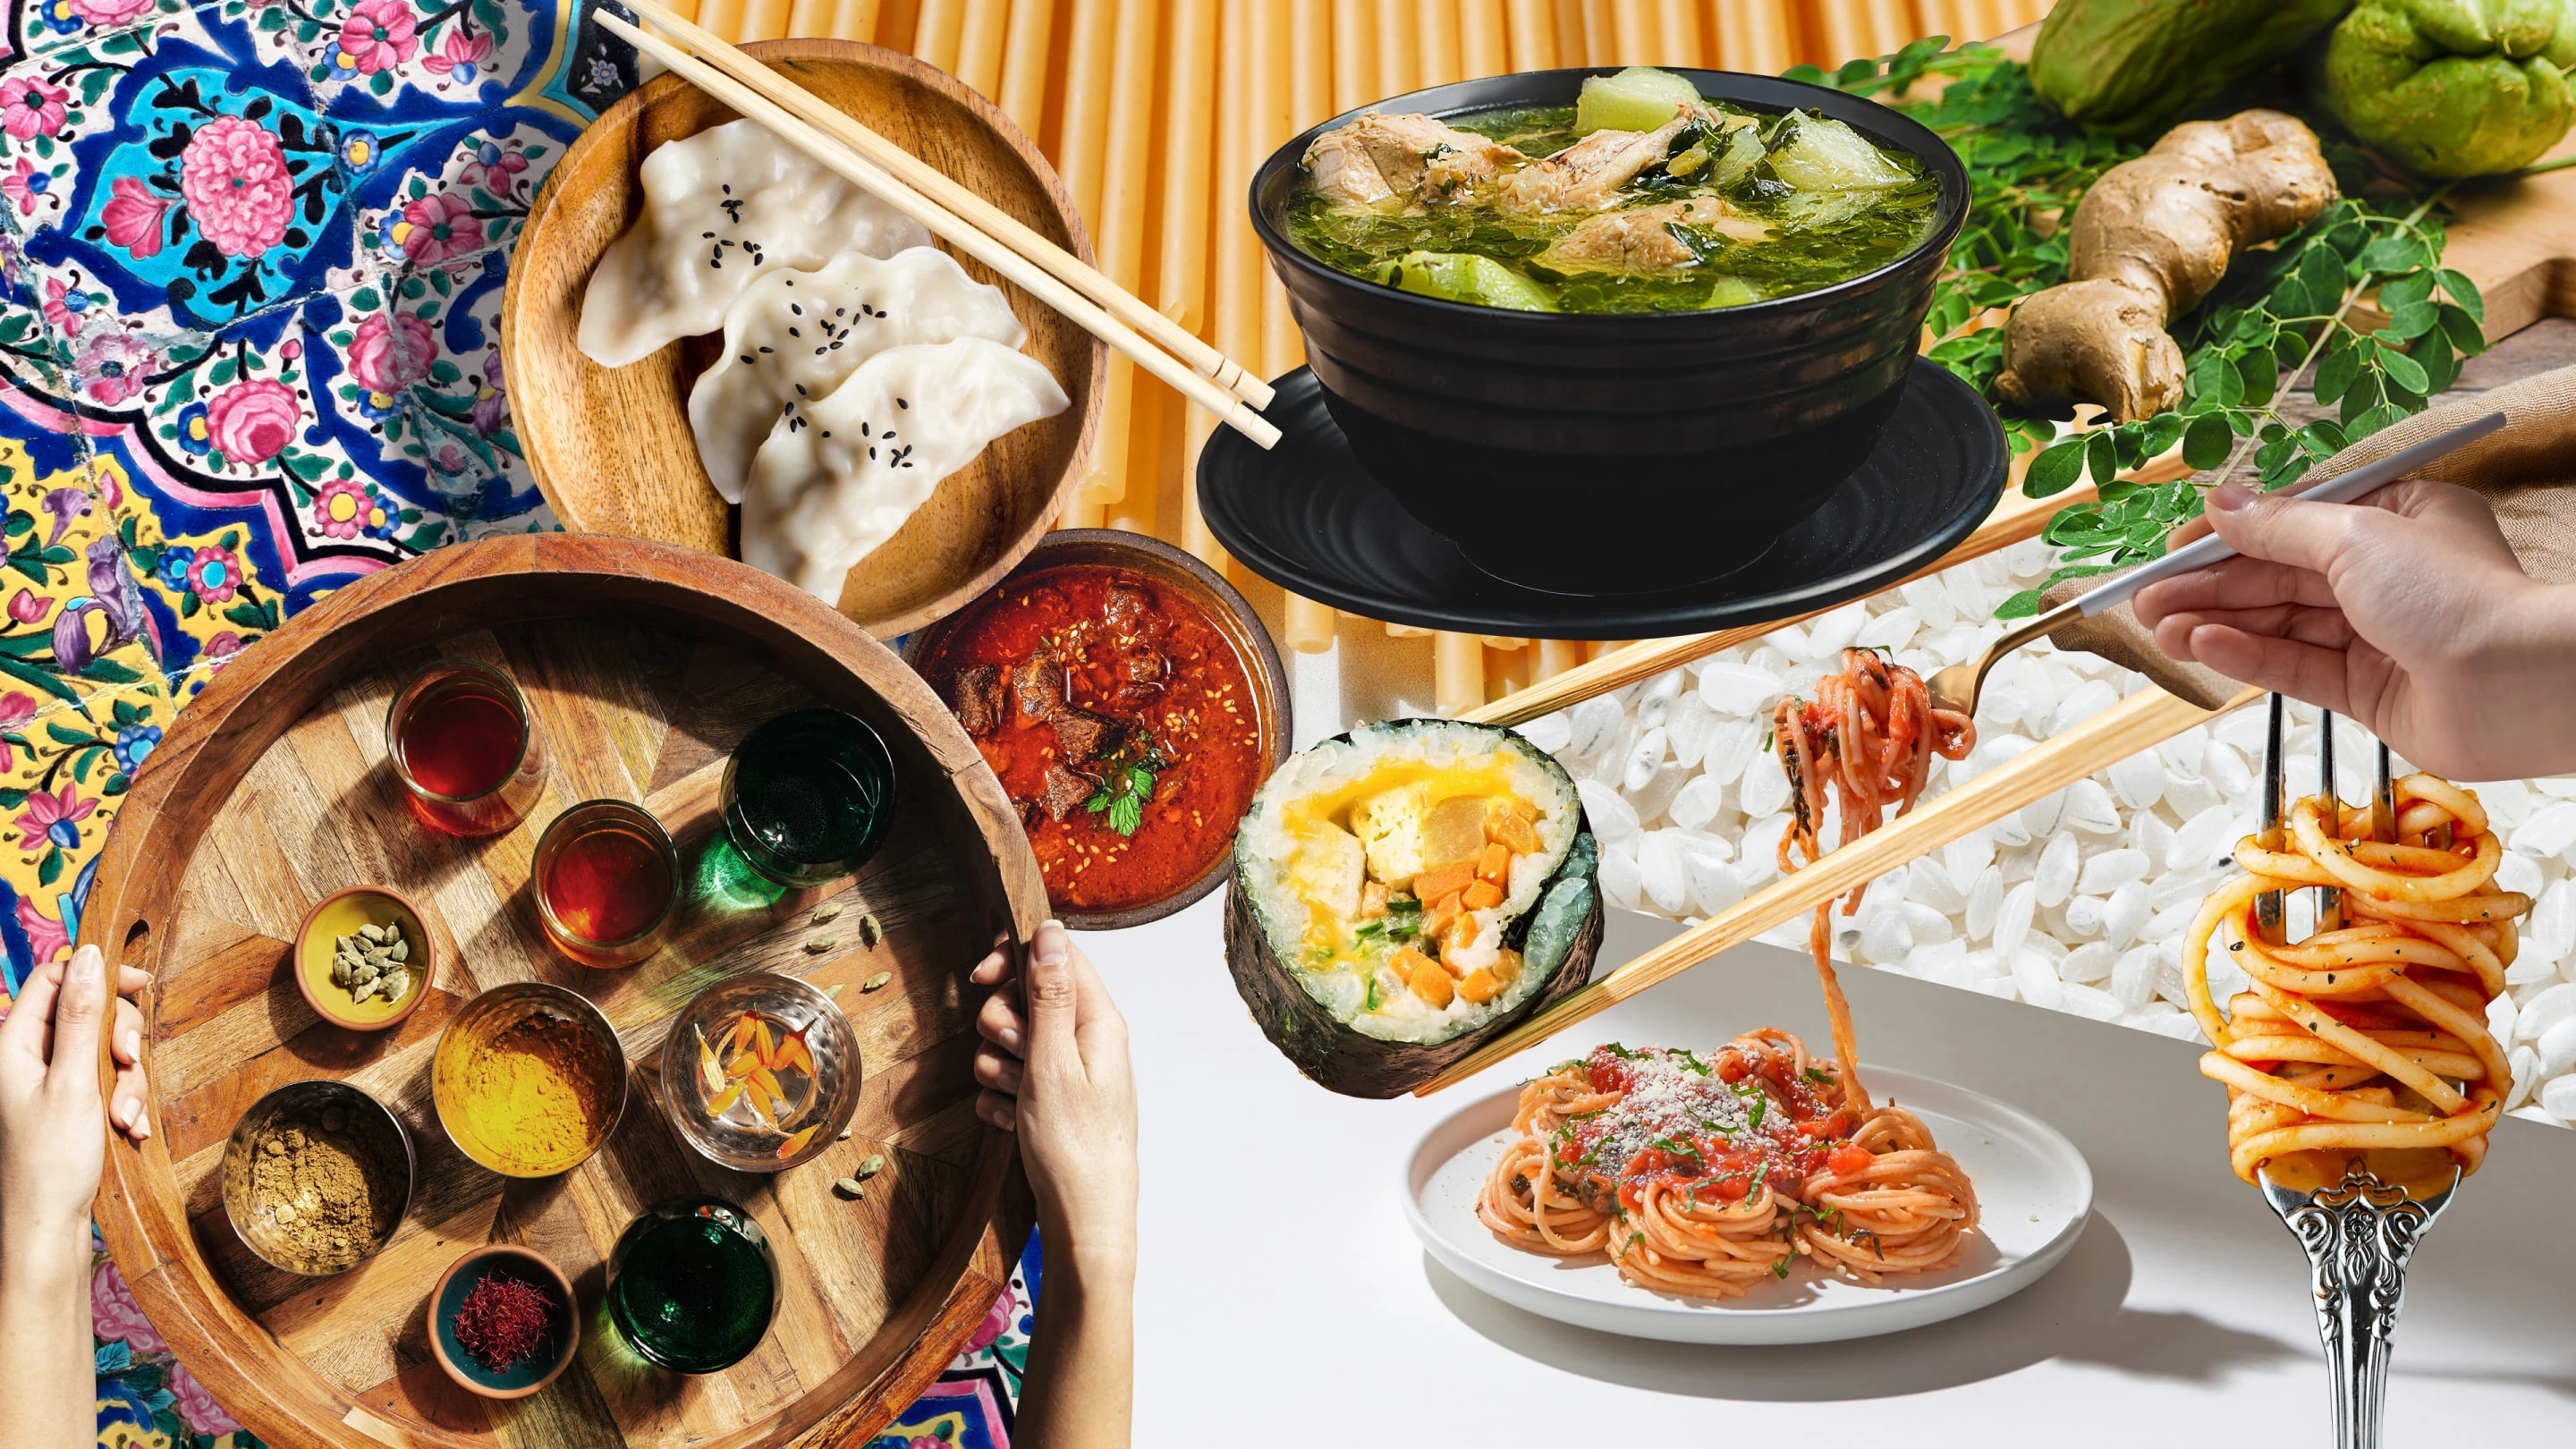 Colorful collage of meals. Dumplings on a brown plate with chopsticks, maki sushi roll, spaghetti rolled on a fork and on a plate, platter of oils and spices and large blue bowl of chicken and vegetable soup.